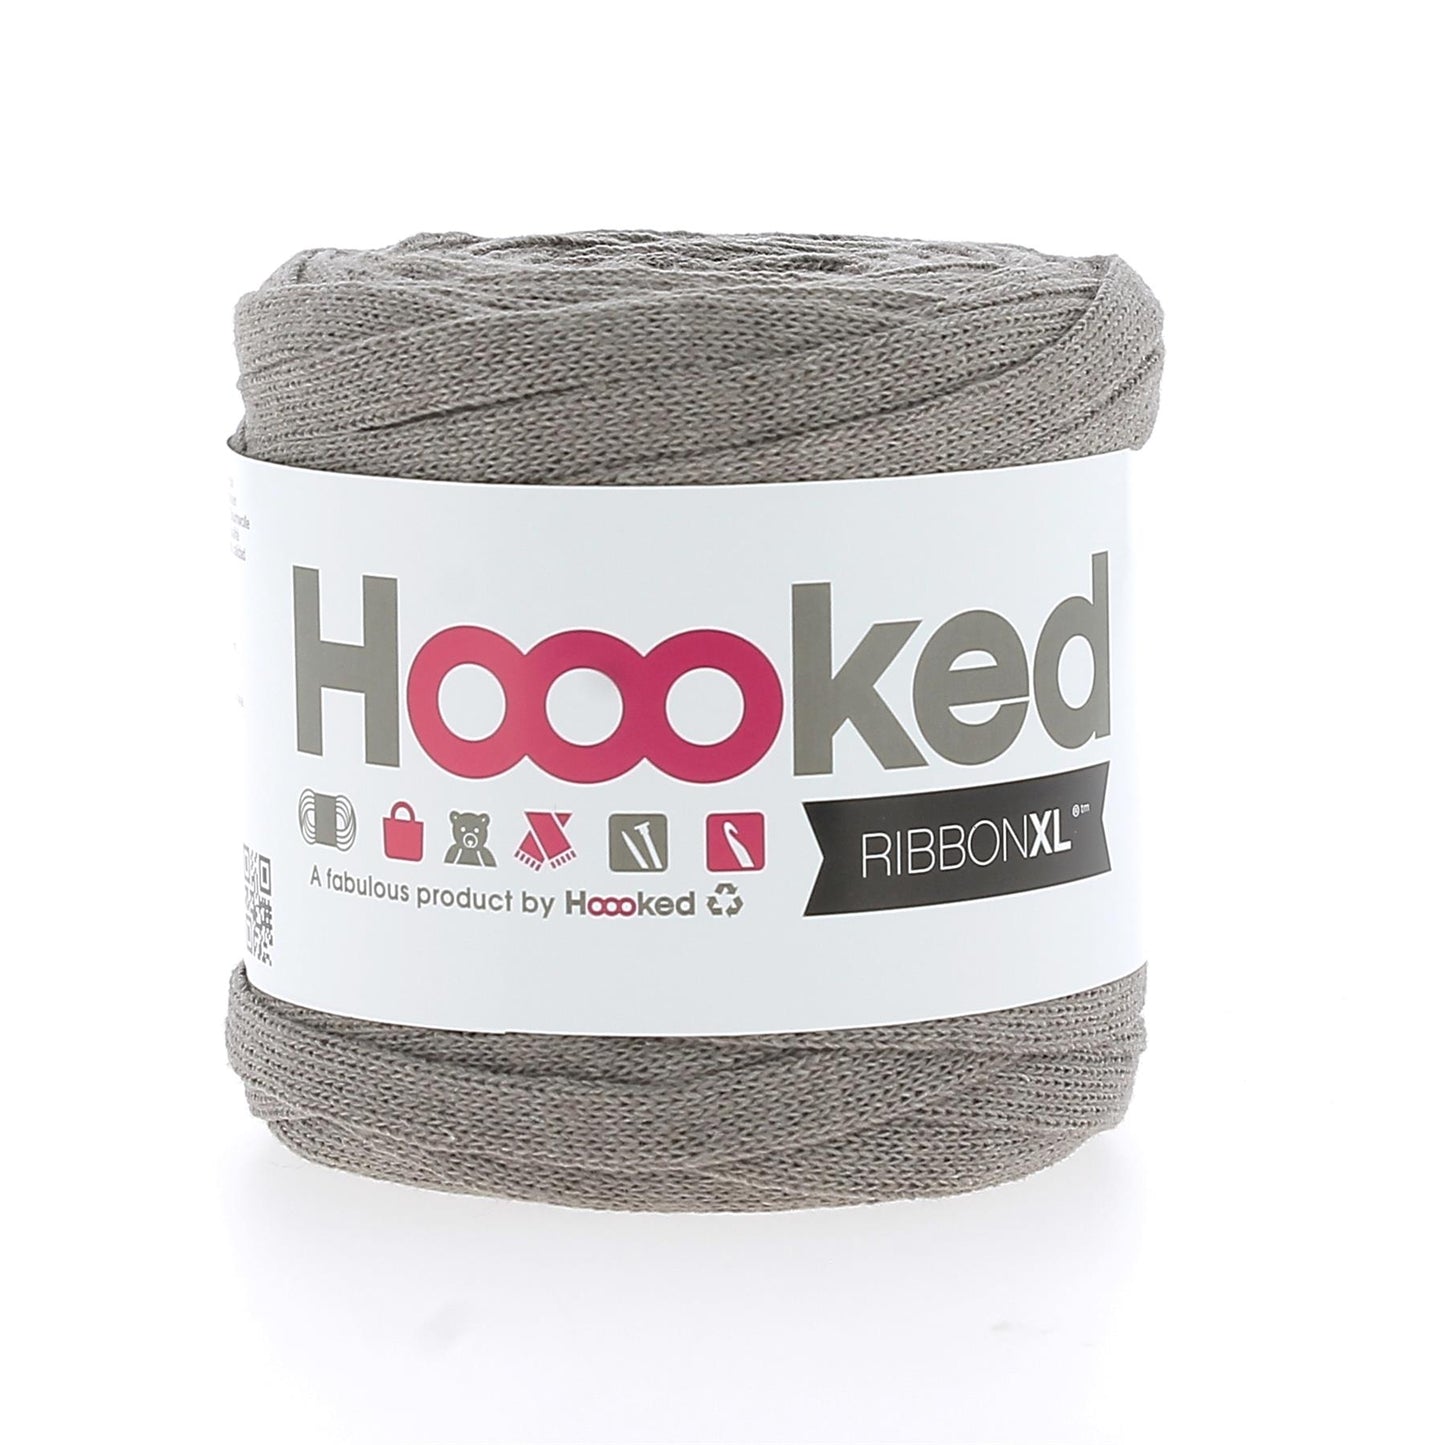 [Hoooked] RXL48MINI RibbonXL Earth Taupe Cotton Yarn - 60M, 125g